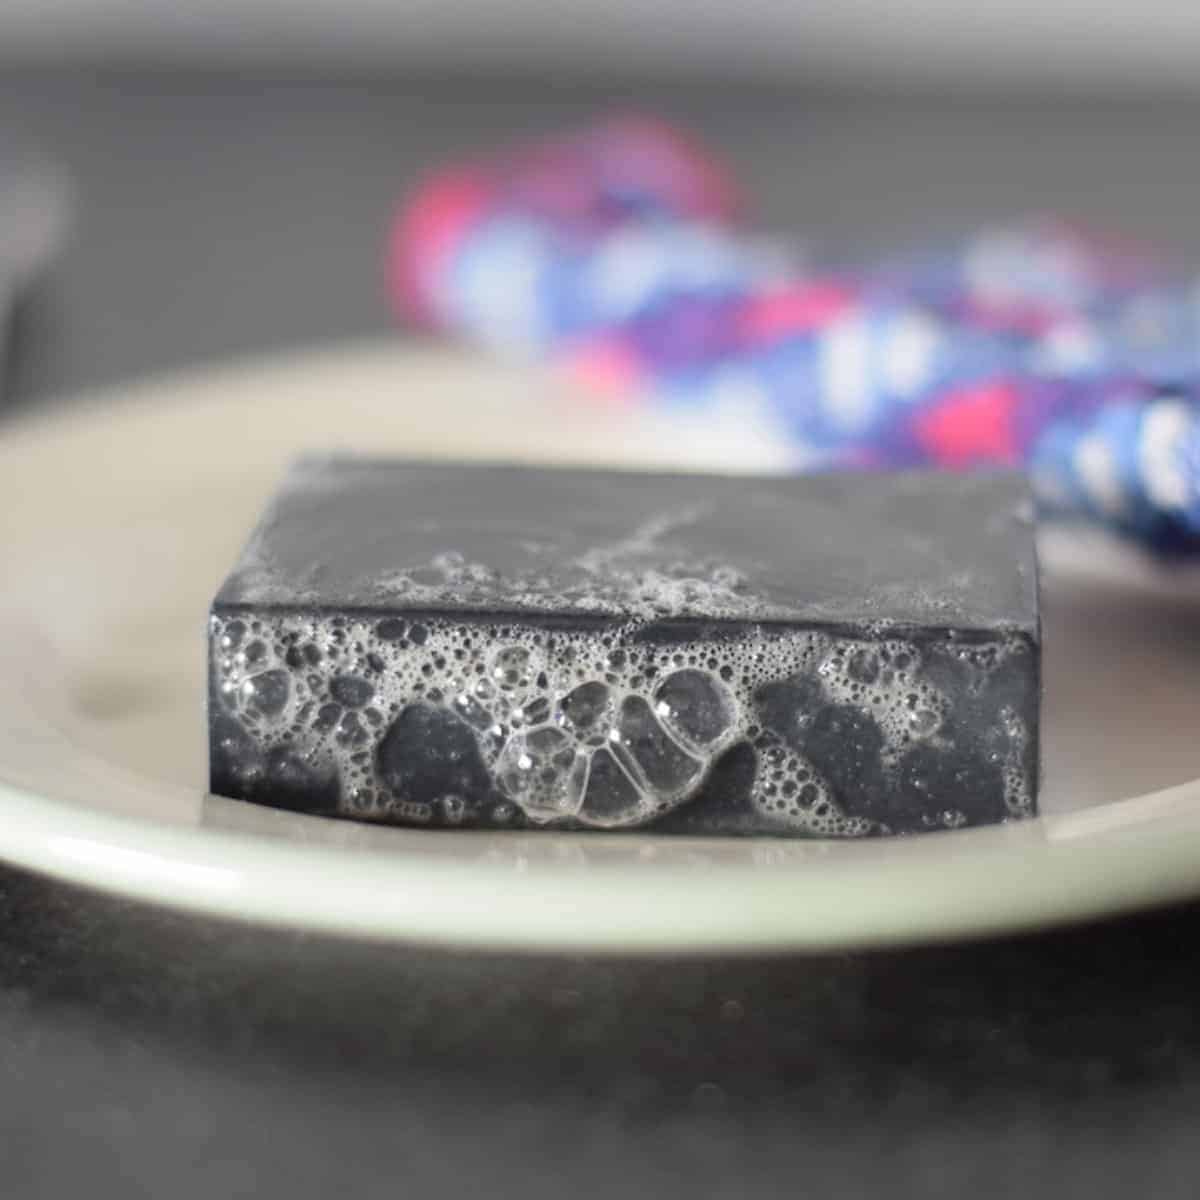 Clay and Charcoal Soap Recipe